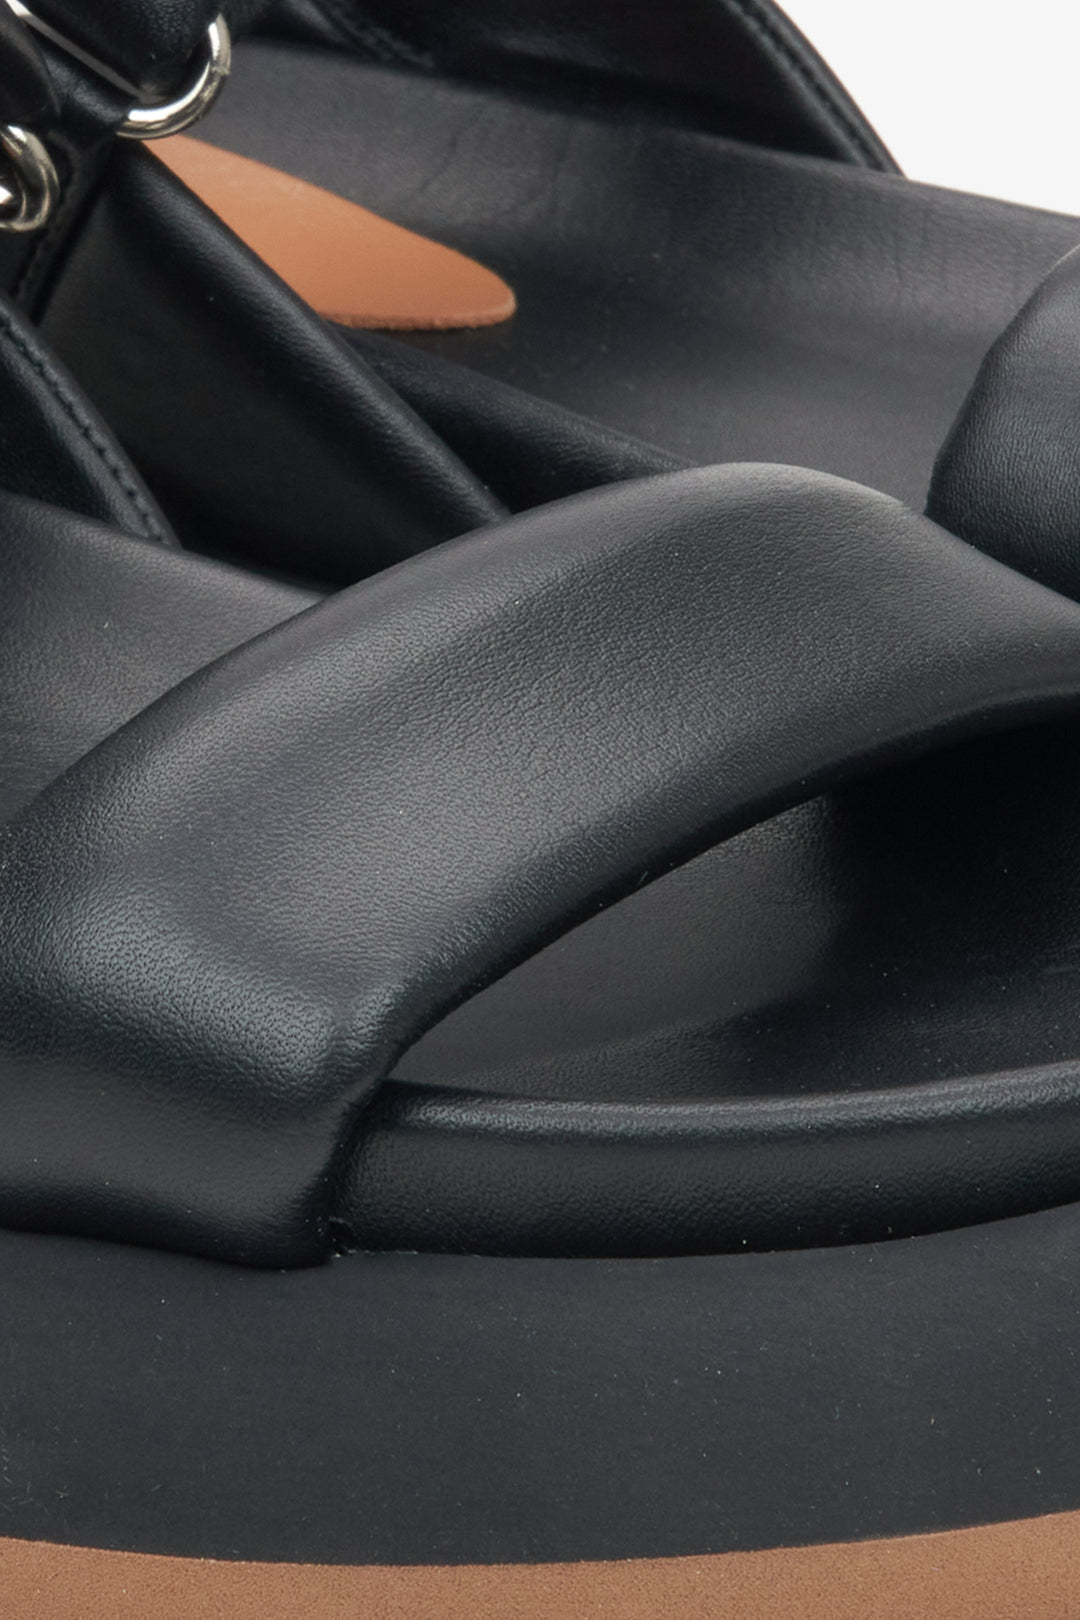 Women's black leather sandals by Estro - close-up on the details.